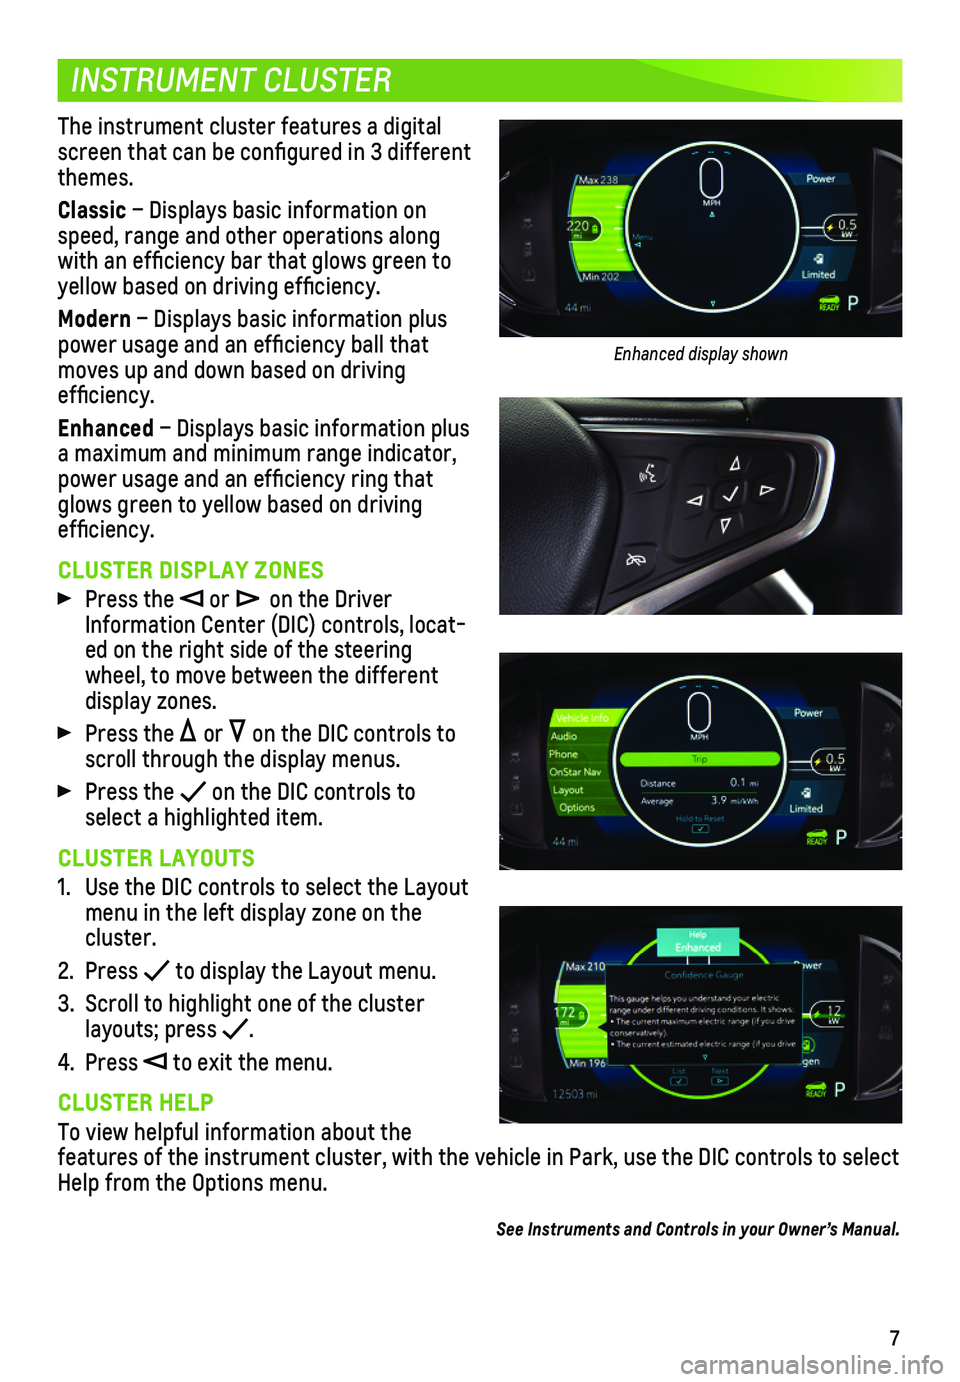 CHEVROLET BOLT EV 2019  Get To Know Guide 7
INSTRUMENT CLUSTER
The instrument cluster features a digital screen that can be configured in 3 different themes.
Classic – Displays basic information on speed, range and other operations along wi